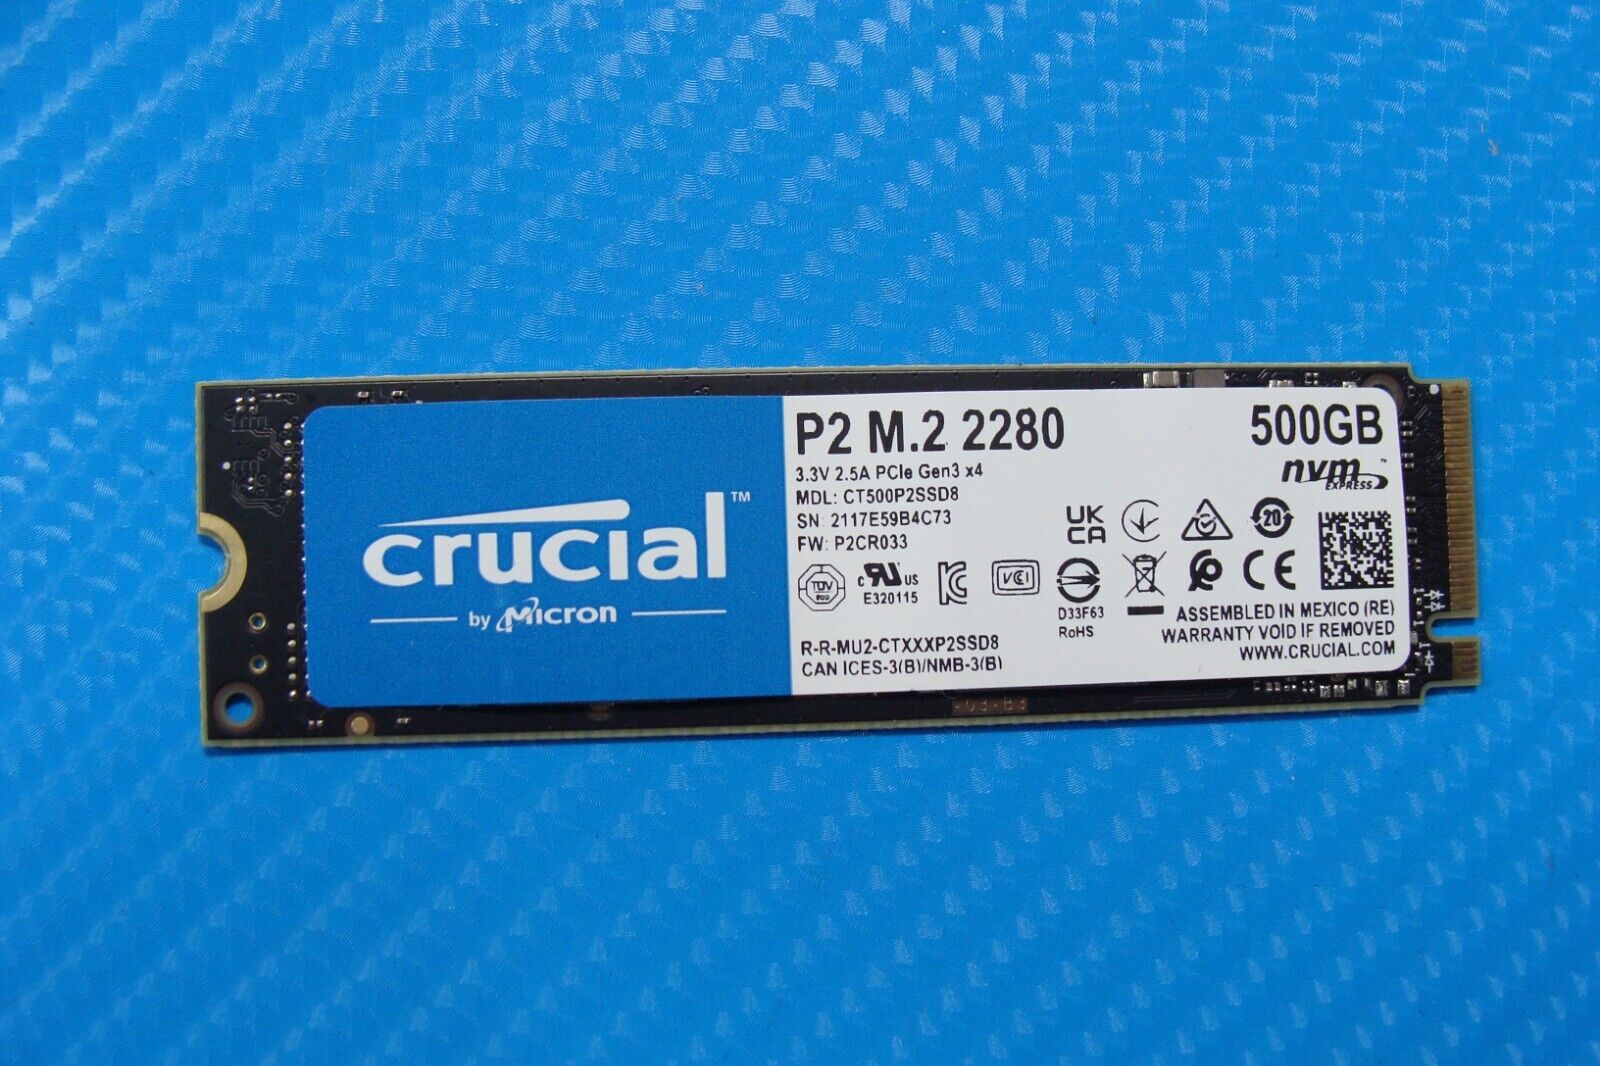 Lenovo E15 Crucial 500GB NVMe M.2 SSD Solid State Drive CT500P2SSD8